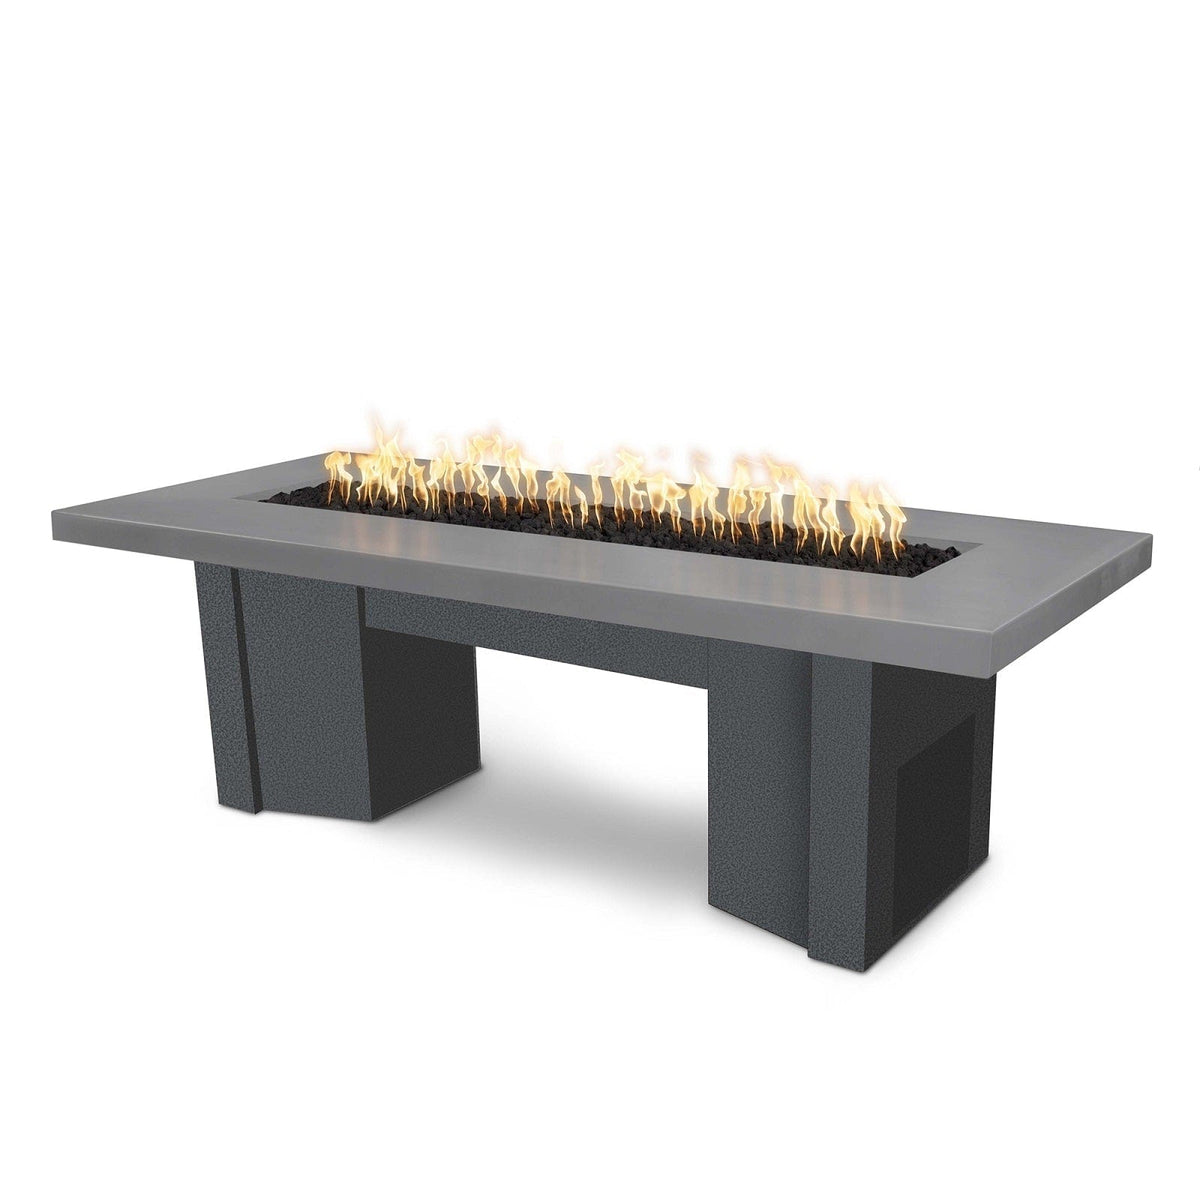 The Outdoor Plus Fire Features Natural Gray (-NGY) / Silver Vein Powder Coated Steel (-SLV) The Outdoor Plus 60&quot; Alameda Fire Table Smooth Concrete in Liquid Propane - 12V Electronic Ignition / OPT-ALMGFRC60E12V-LP